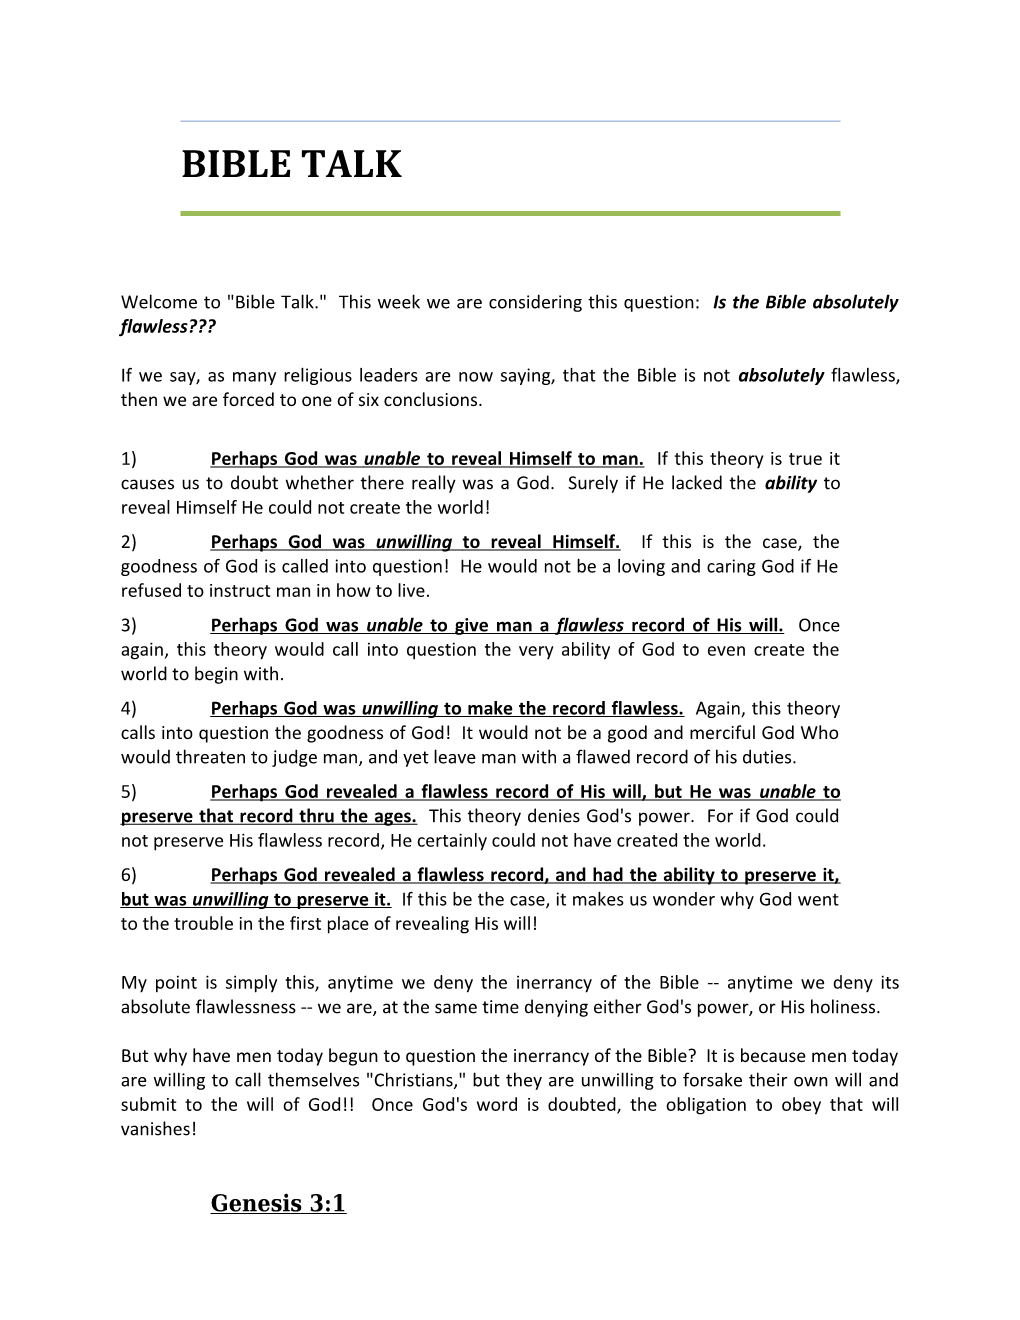 Welcome to Bible Talk. This Week We Are Considering This Question: Is the Bible Absolutely